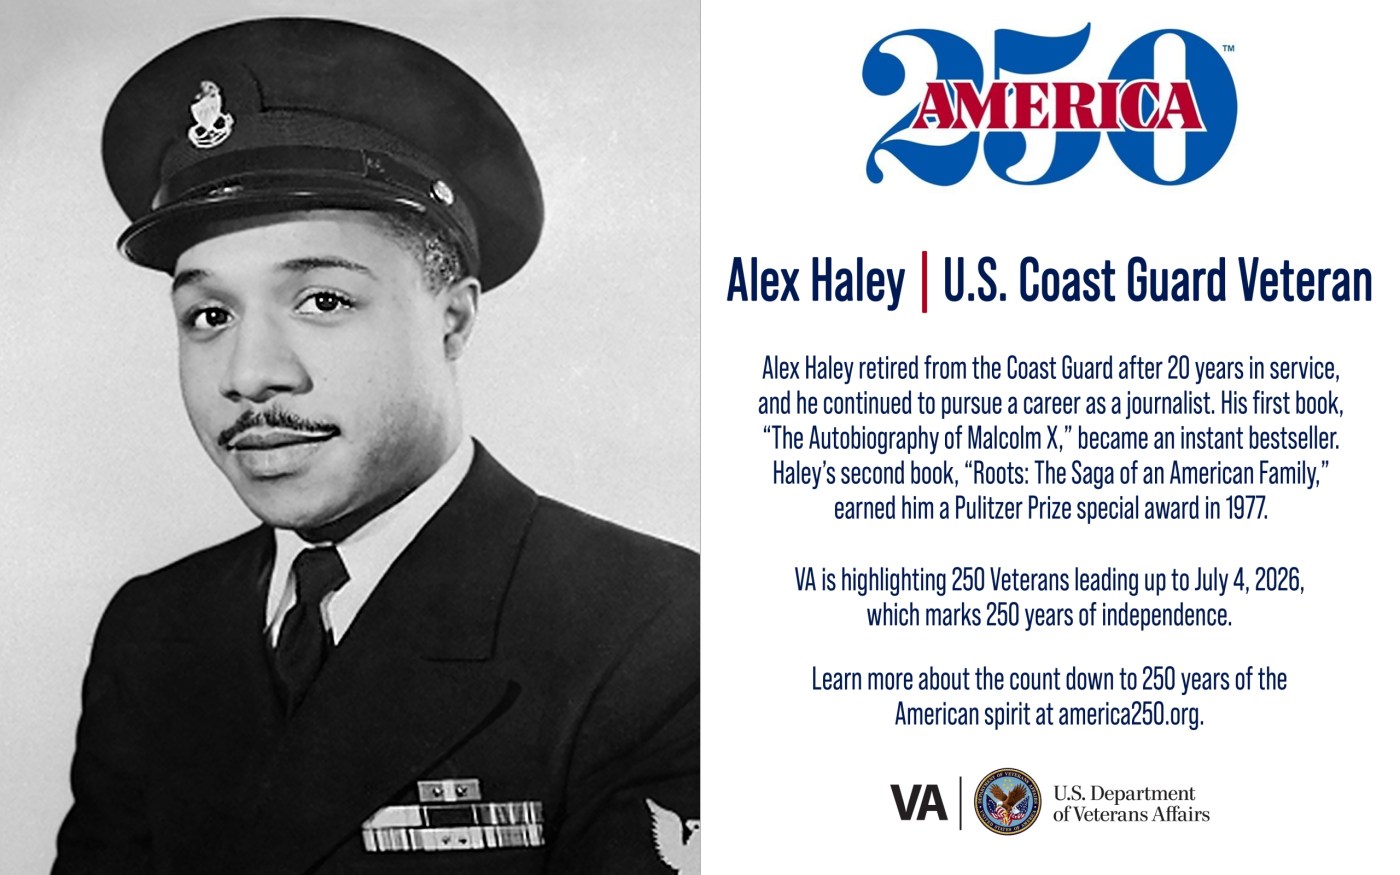 This week’s America250 salute is Coast Guard Veteran Alex Haley, who served as a journalist and later won a Pulitzer Prize.